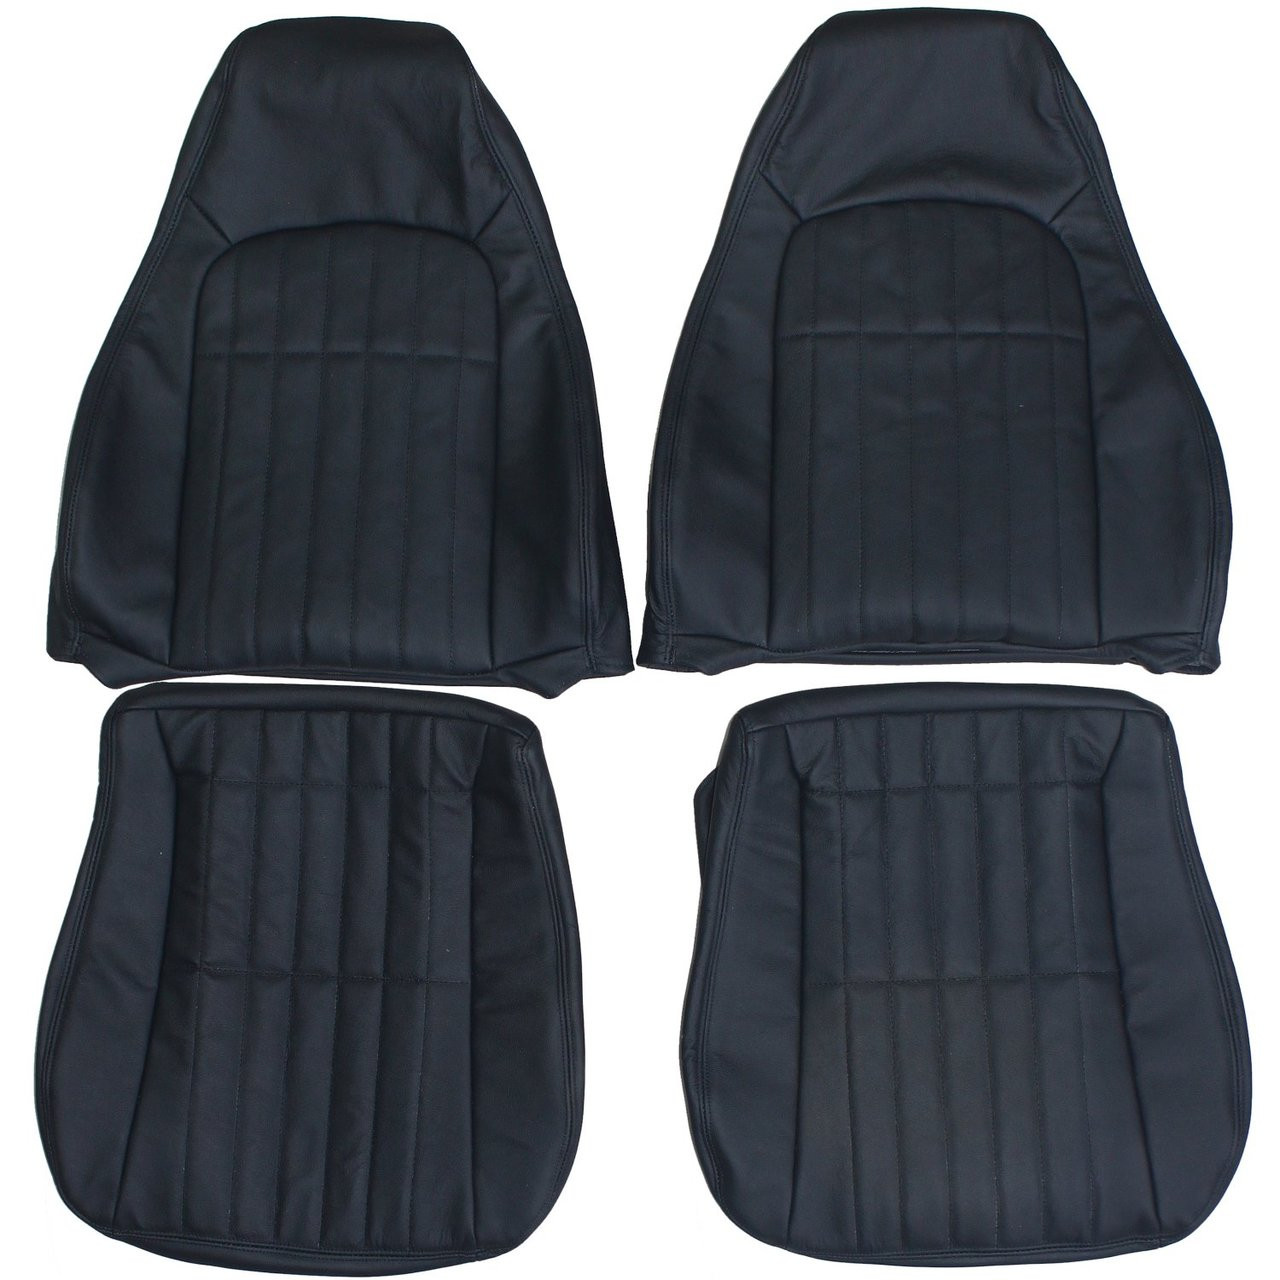 1997-2002 Chevrolet Camaro Z28 Custom Real Leather Seat Covers (Front) -  Lseat.com